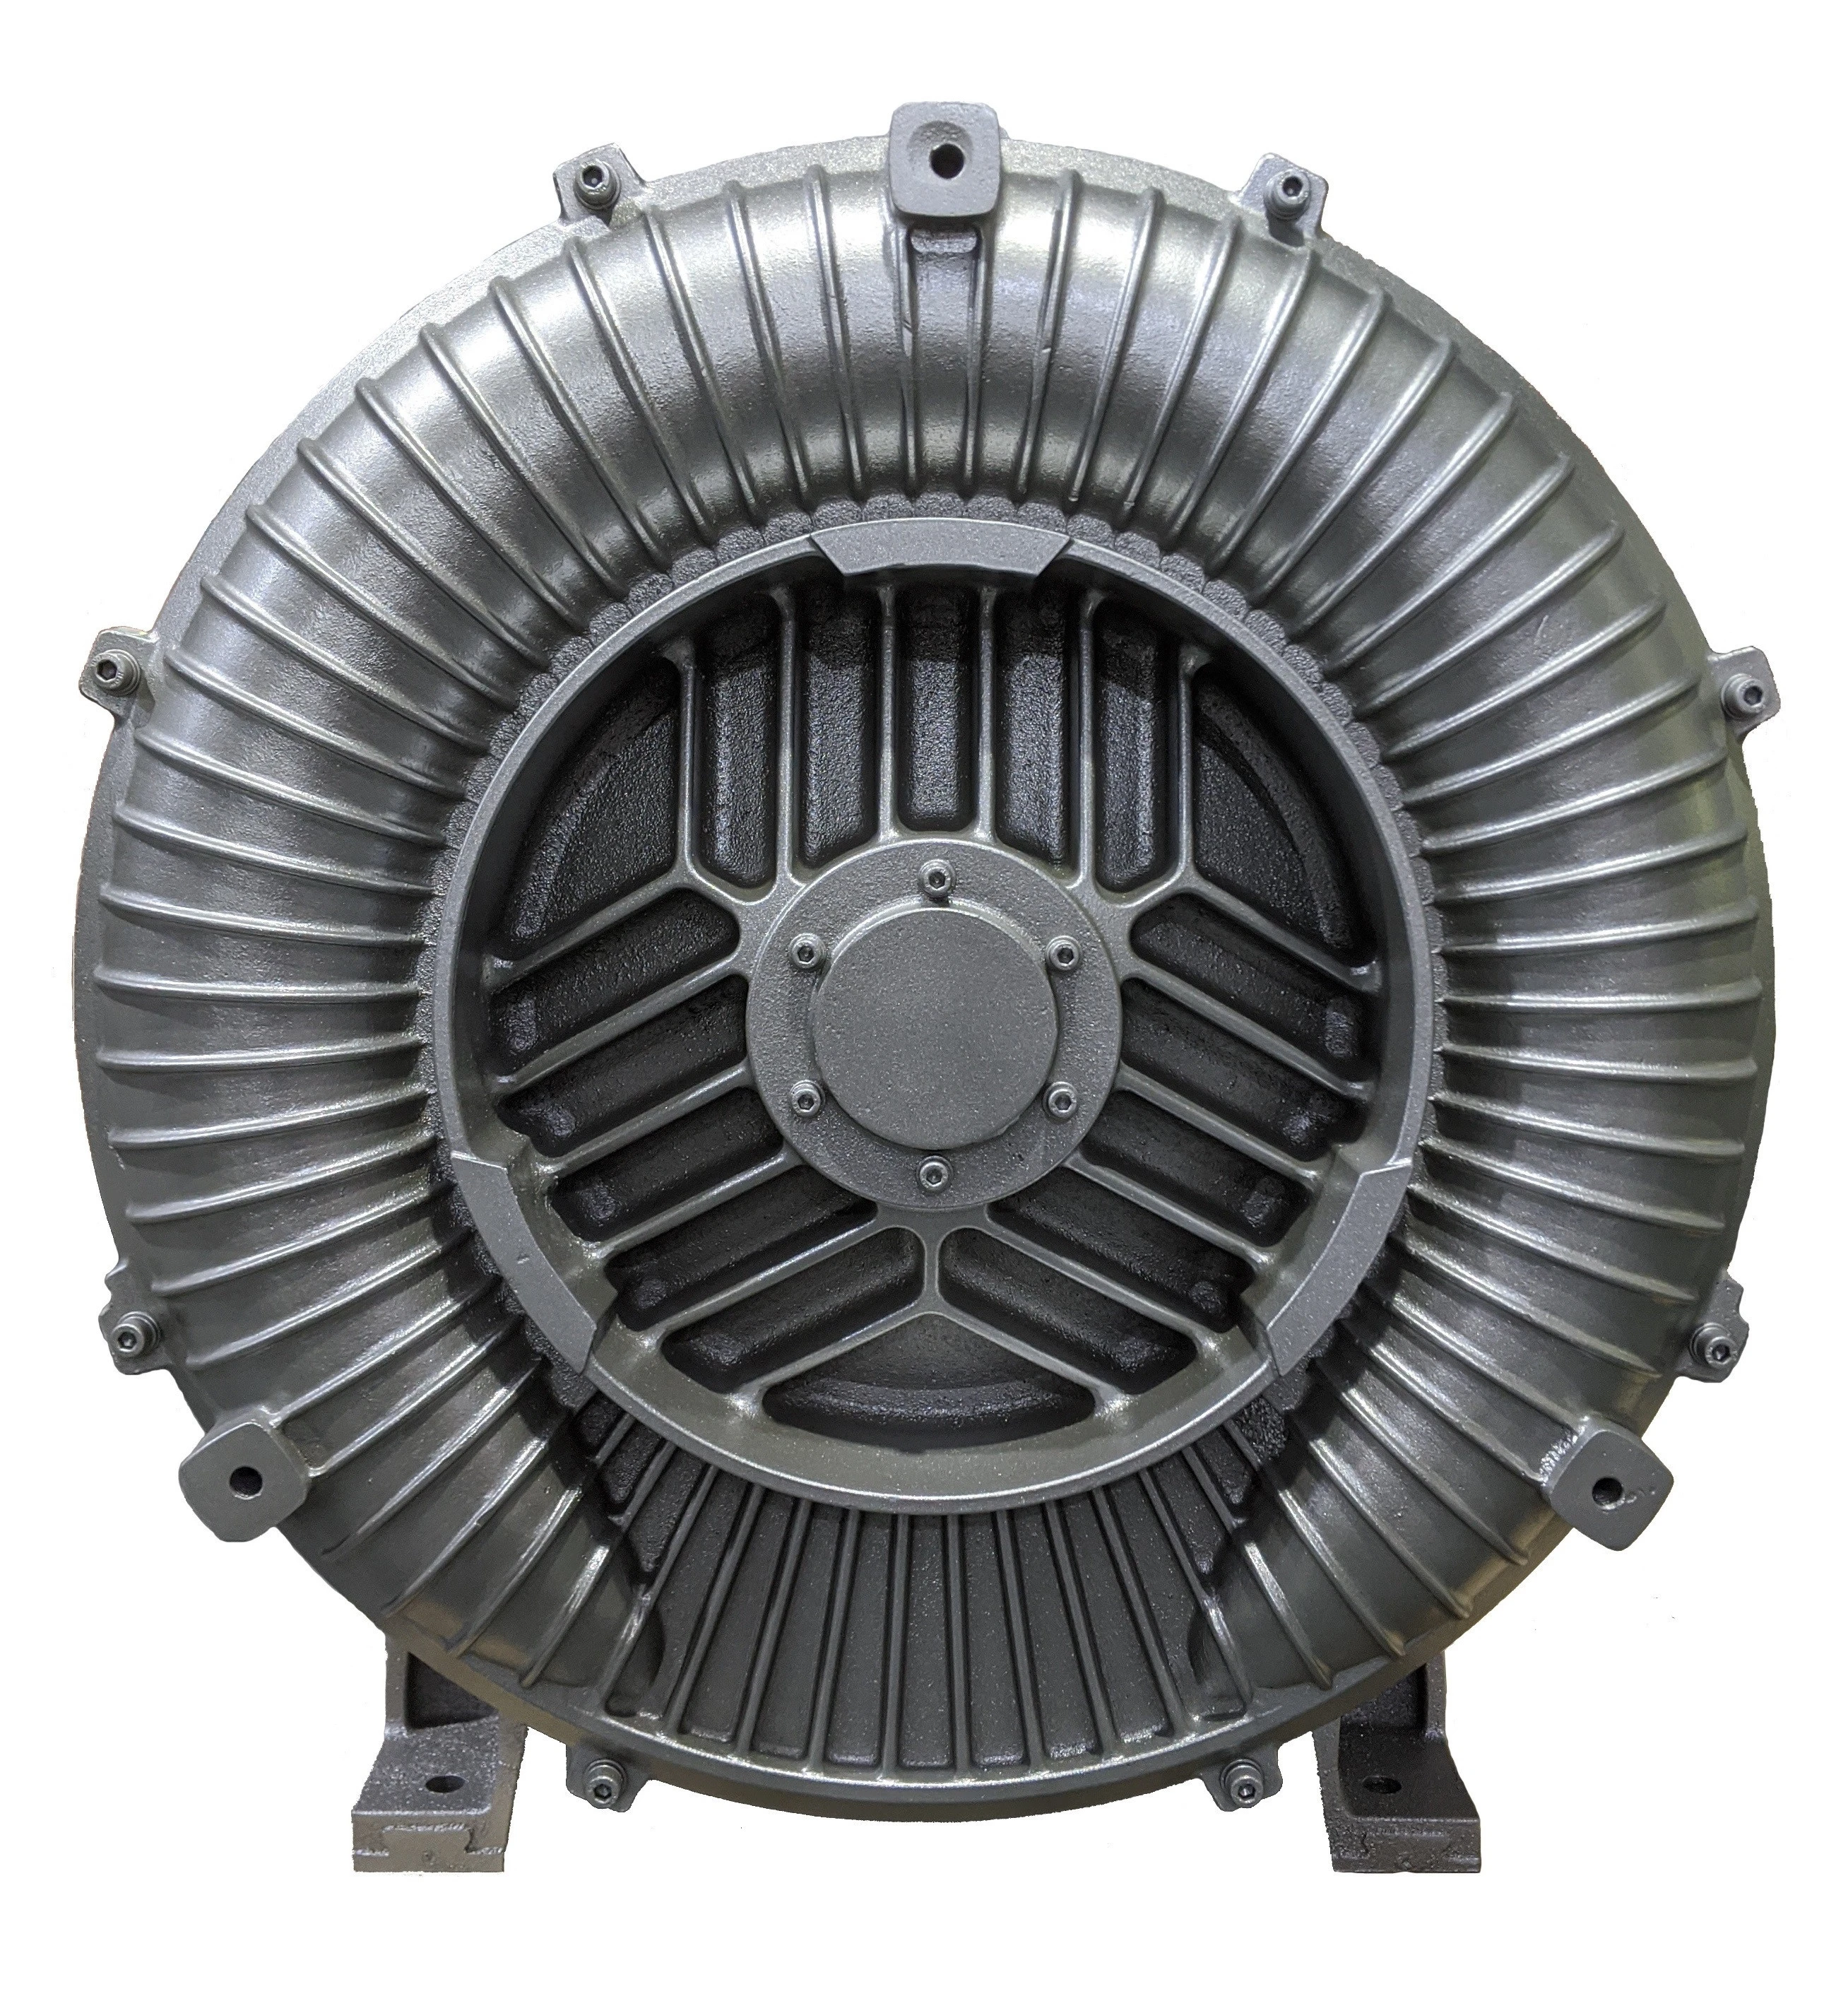 Side channel blower 2GH 92300-H37 Ring blower